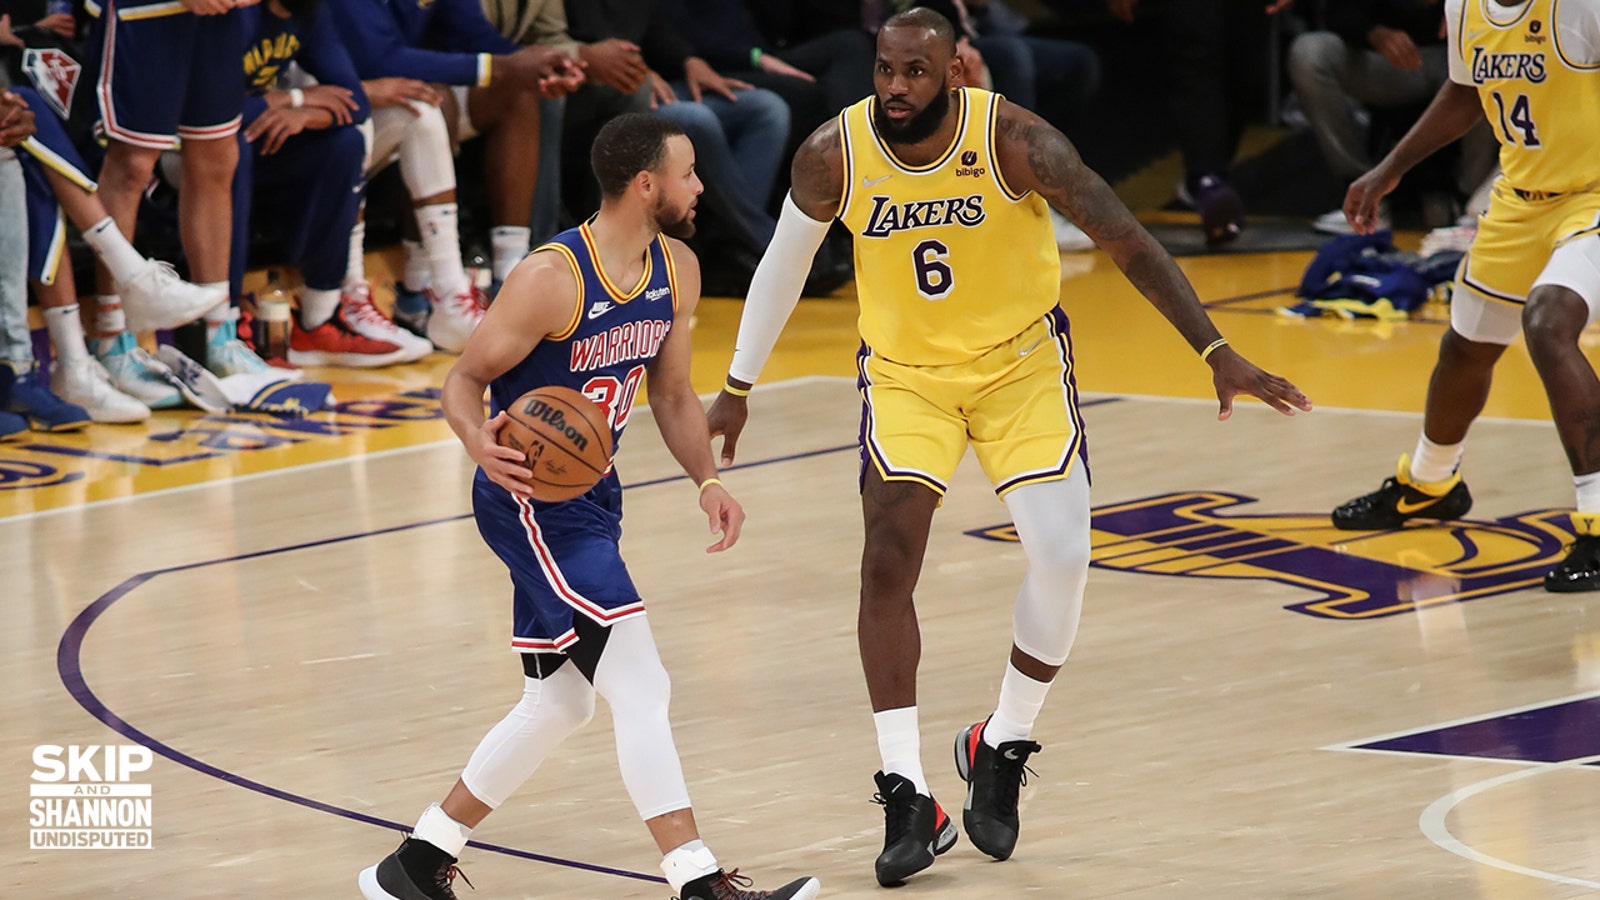 LeBron James would prefer to play with Warriors over Celtics